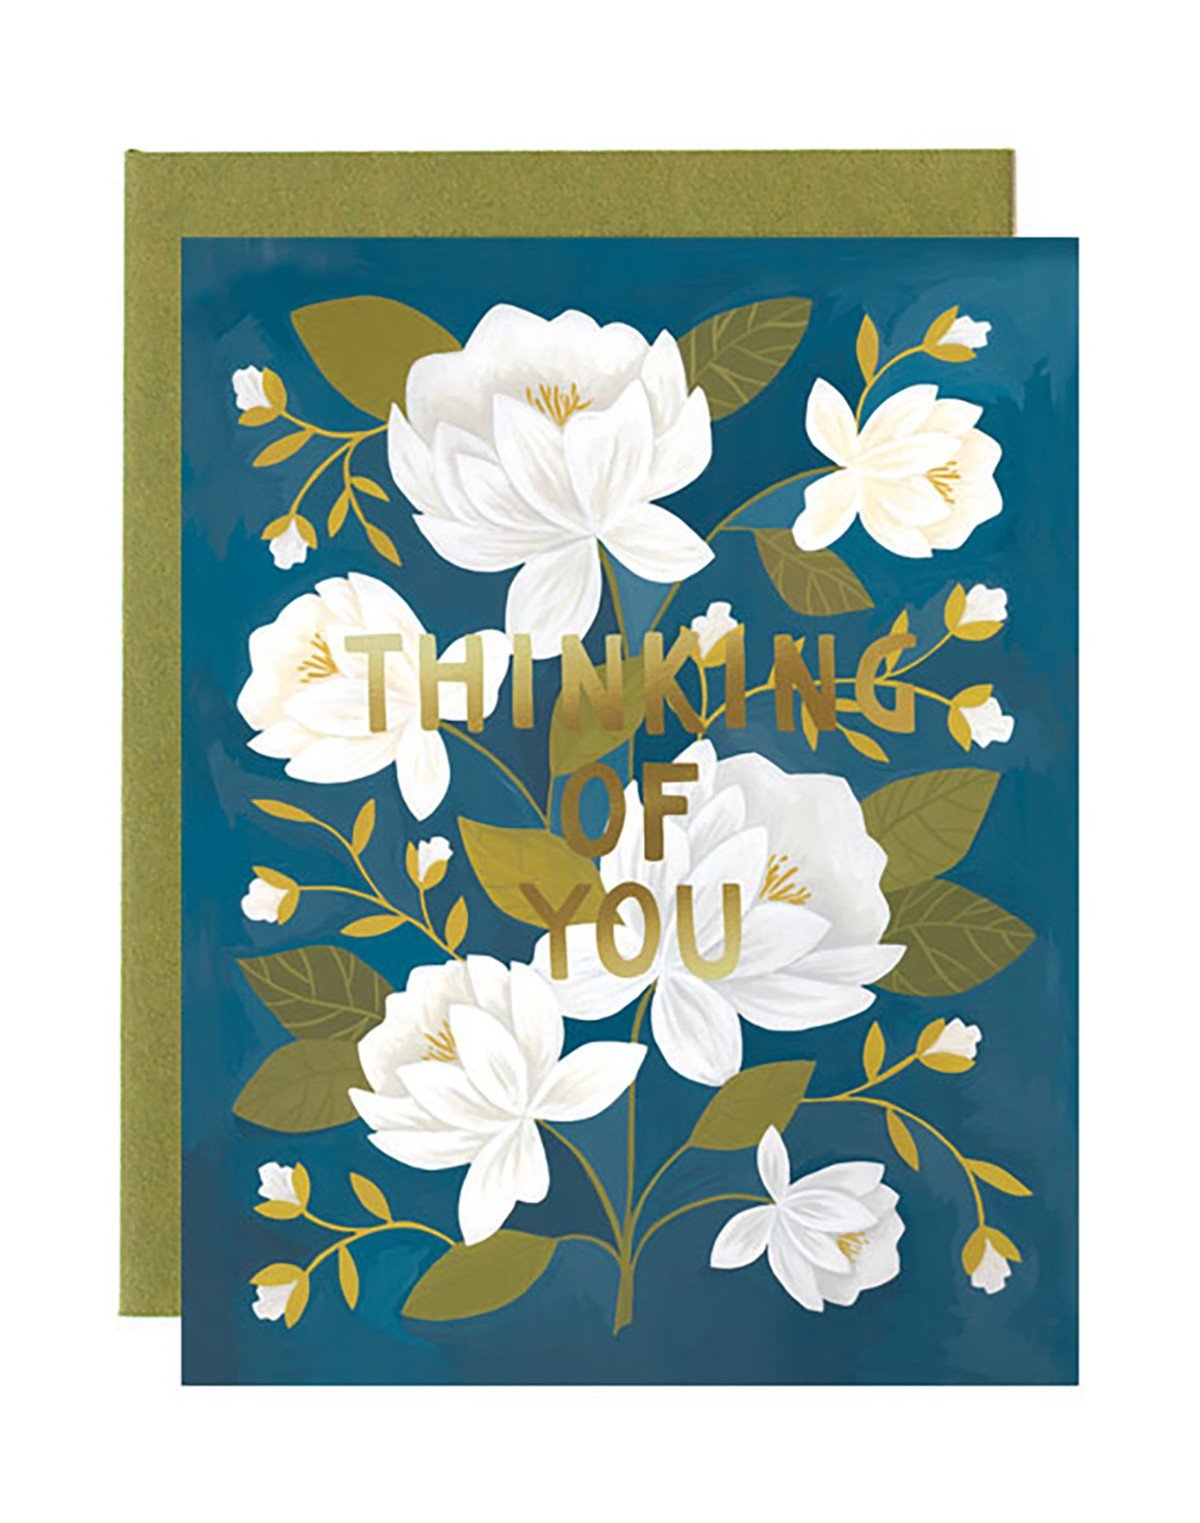 Raleigh Floral Friendship Greeting Card item